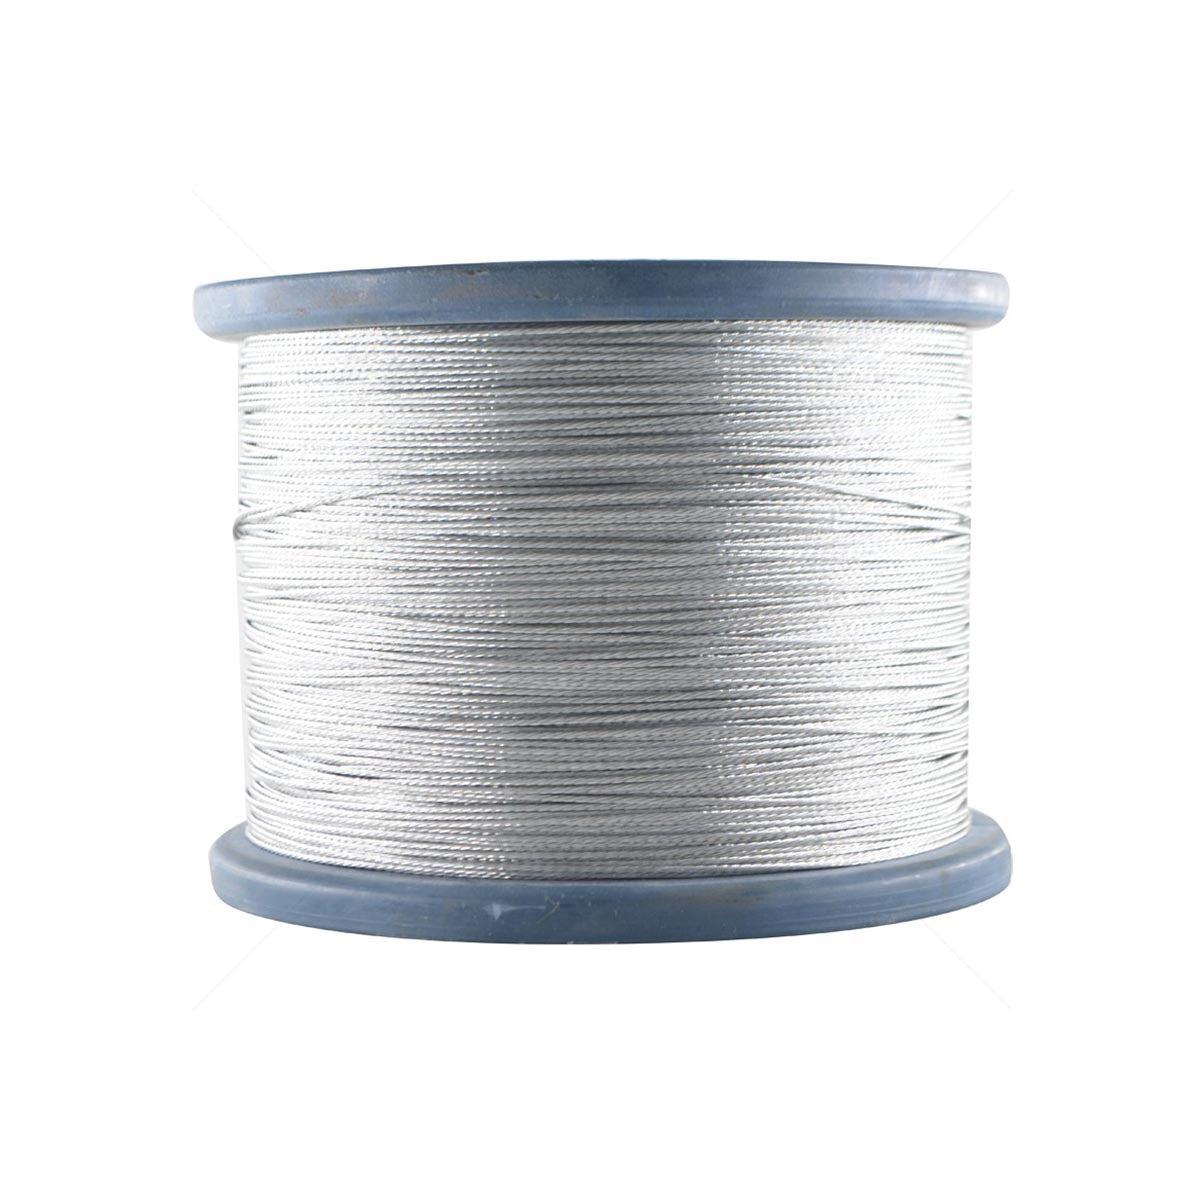 Nemtek Electric Fence 1.2 mm Braided Galvanised Wire Side View EF44-1